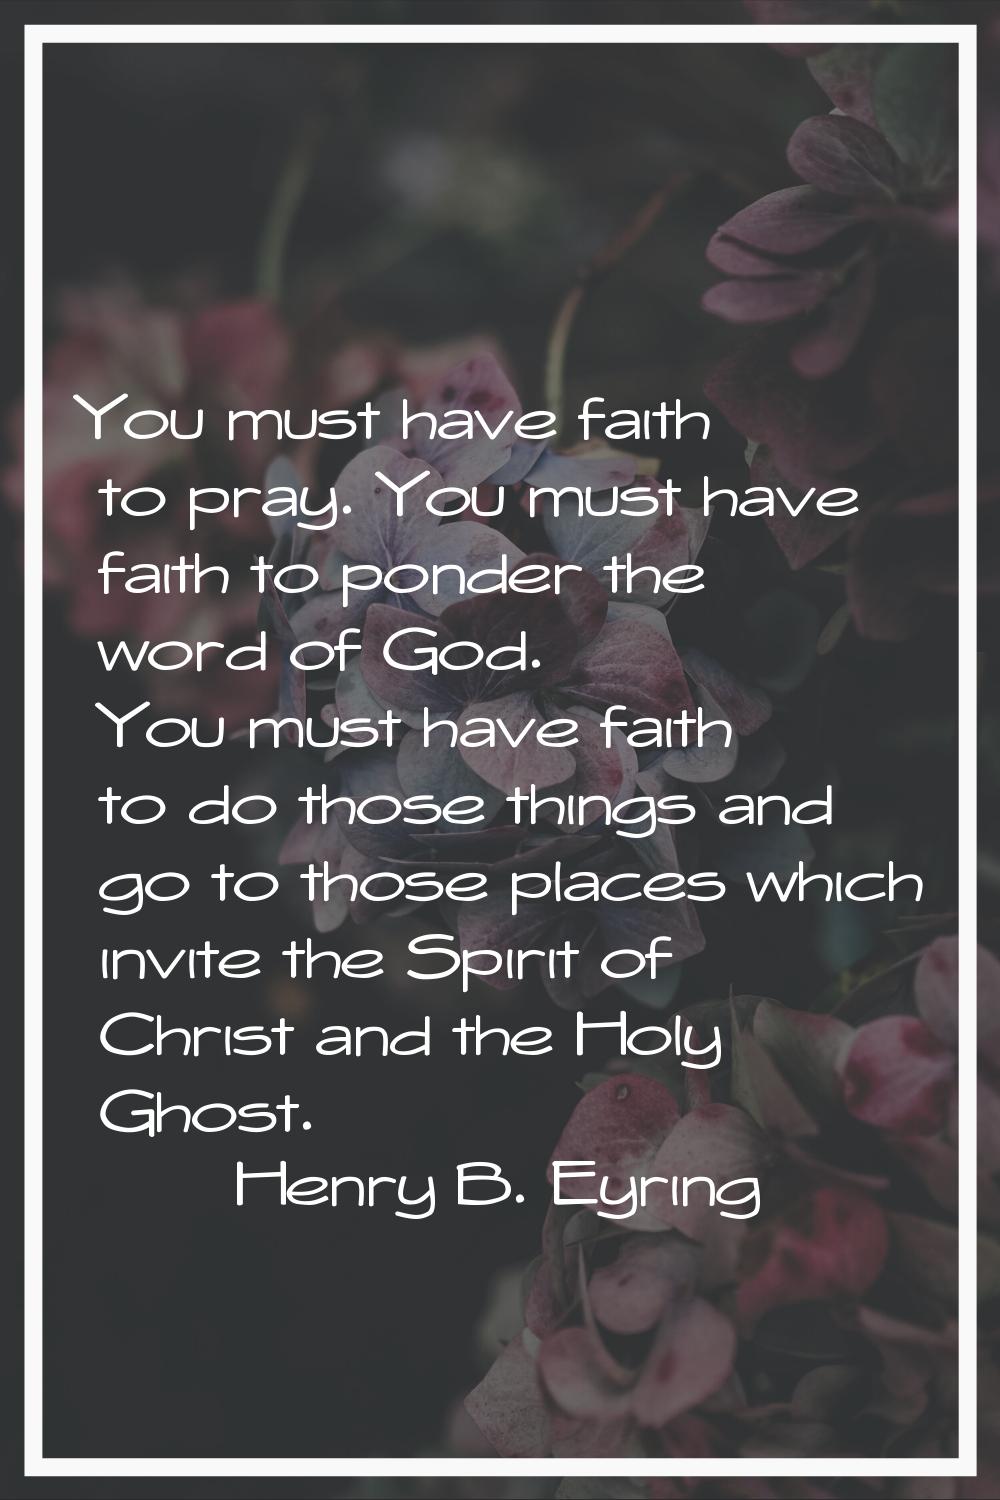 You must have faith to pray. You must have faith to ponder the word of God. You must have faith to 